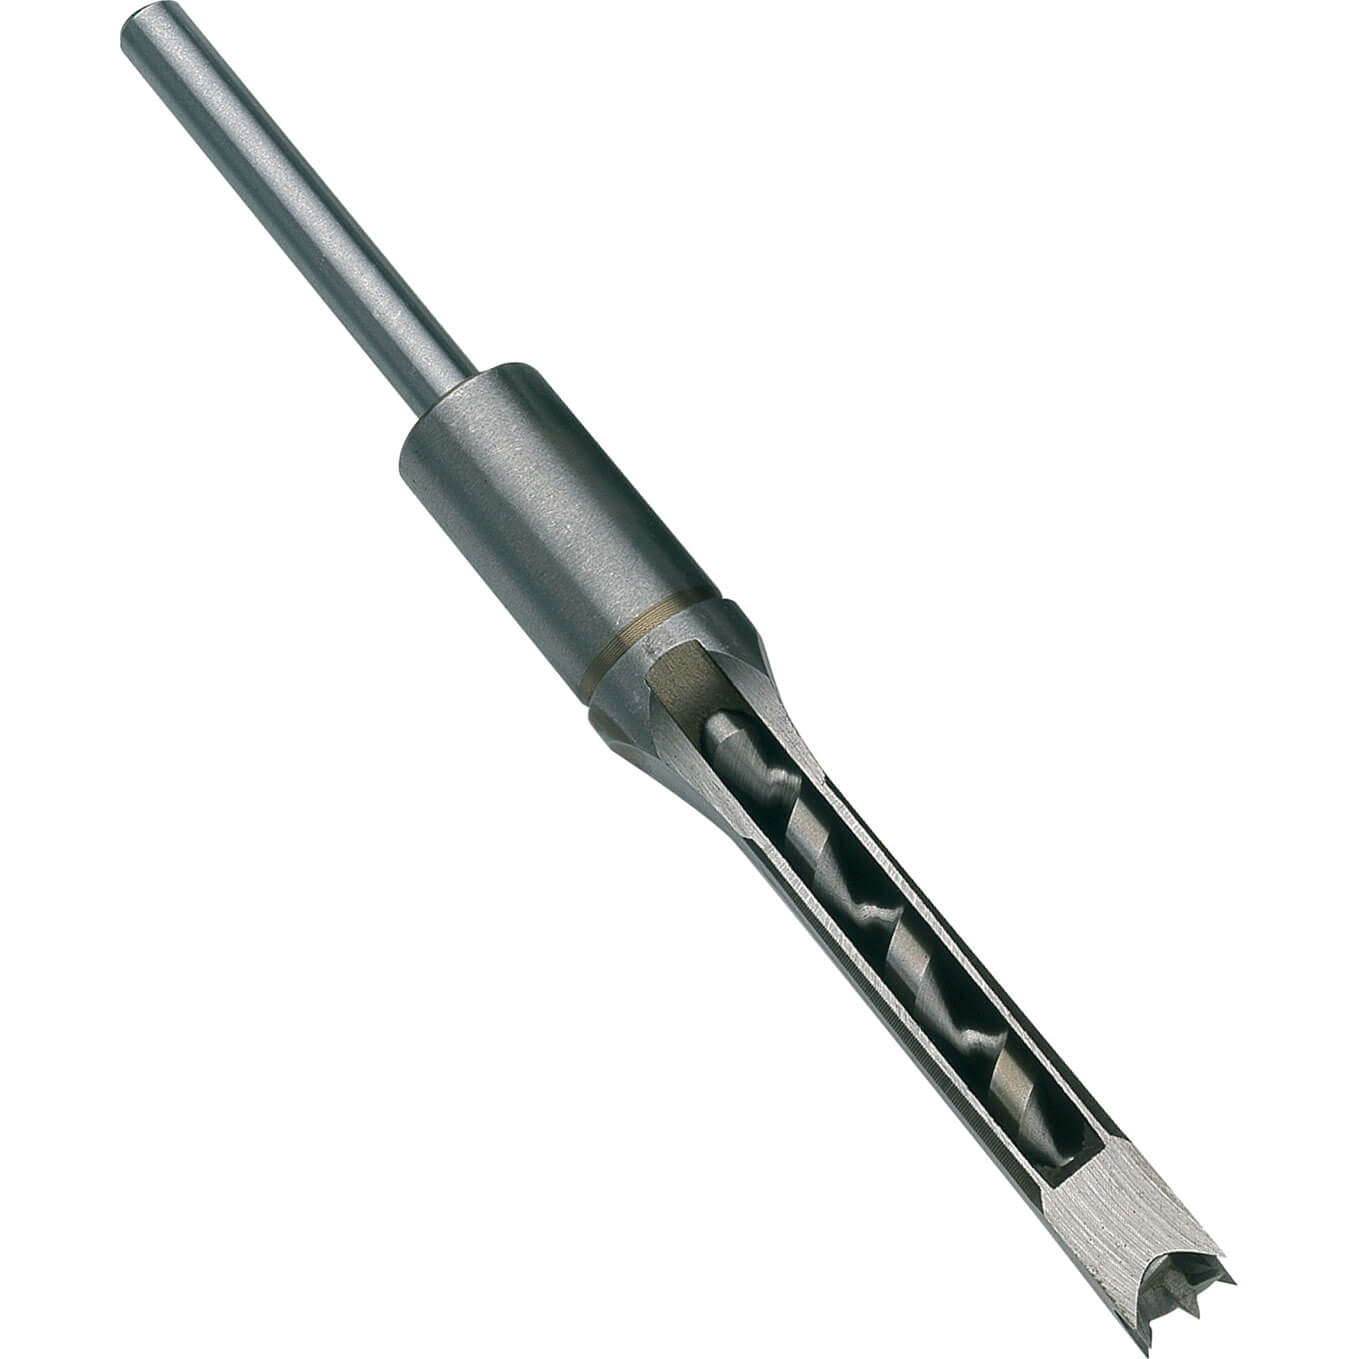 Record Power Chisel & Bit 1/2" for RPM75